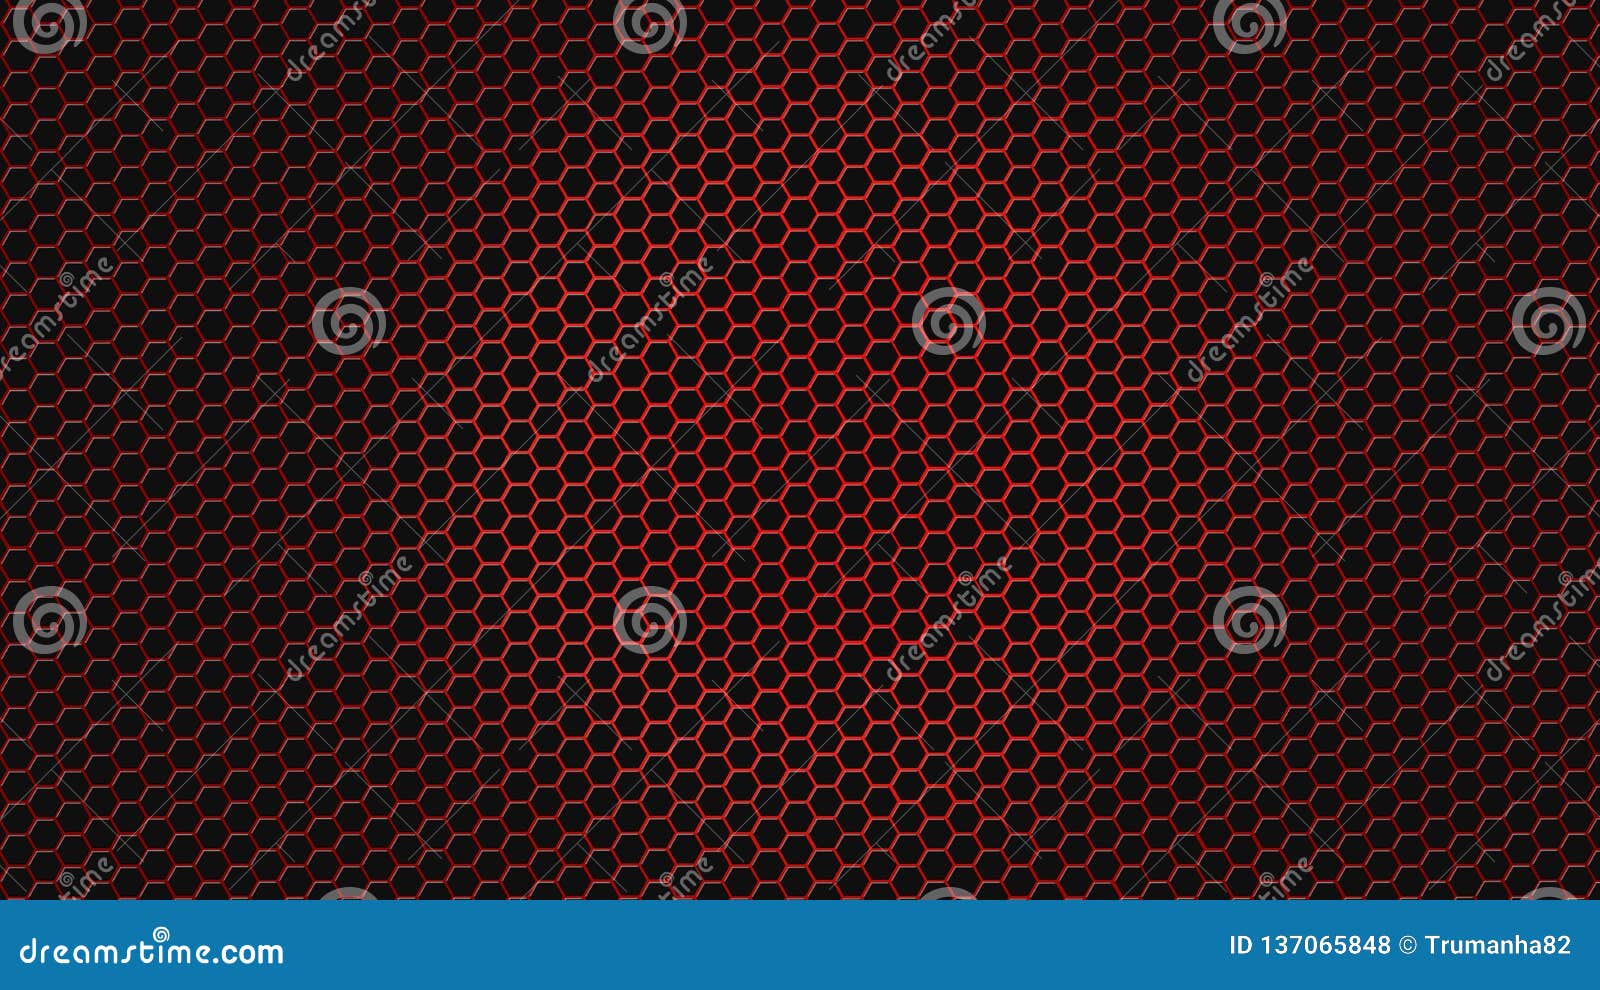 abstract shiny red hexagonal metal mesh in black background